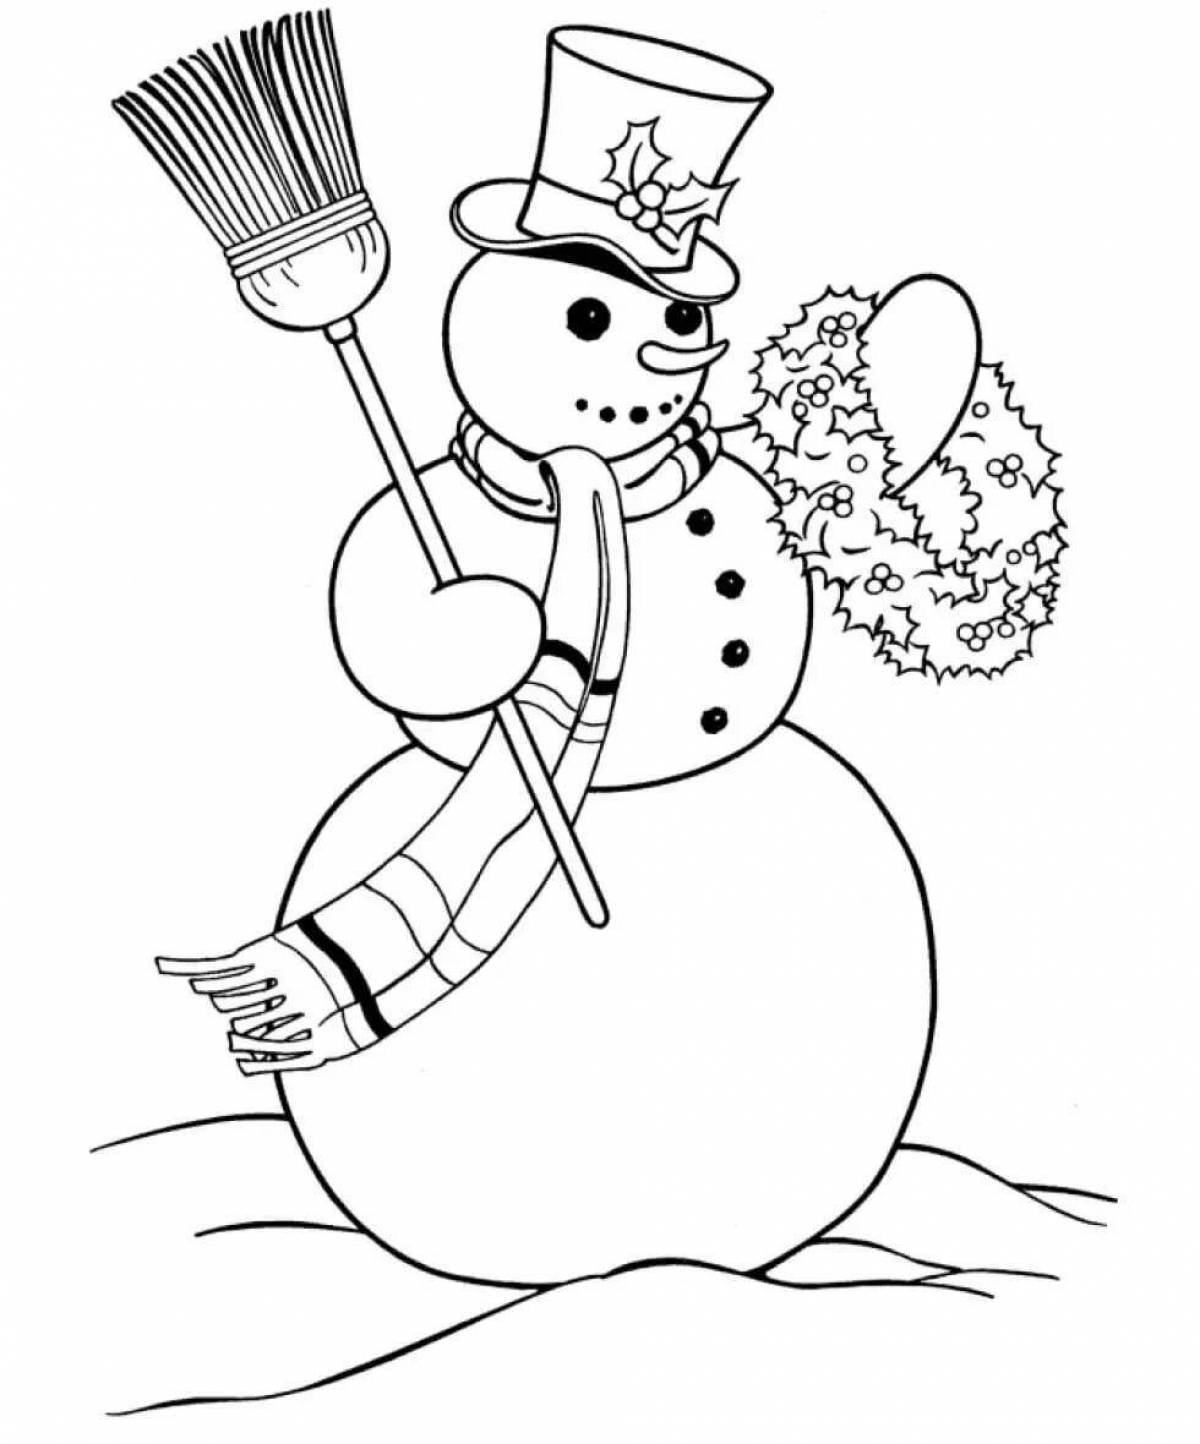 Children's coloring snowman with clear eyes